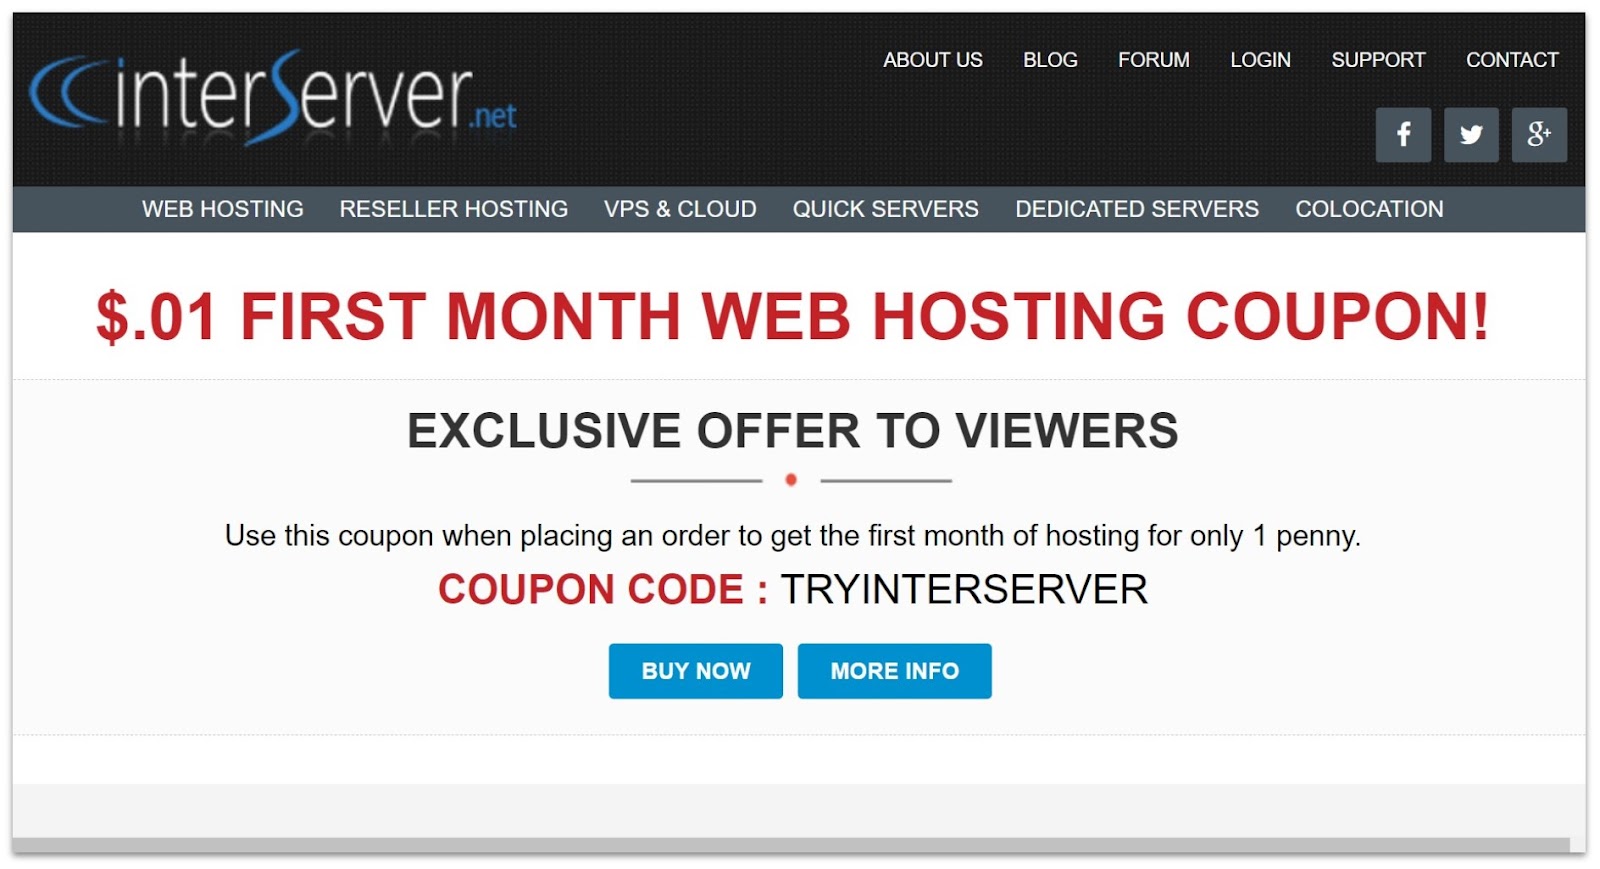 InterServer $0.01 discount offer coupon landing page